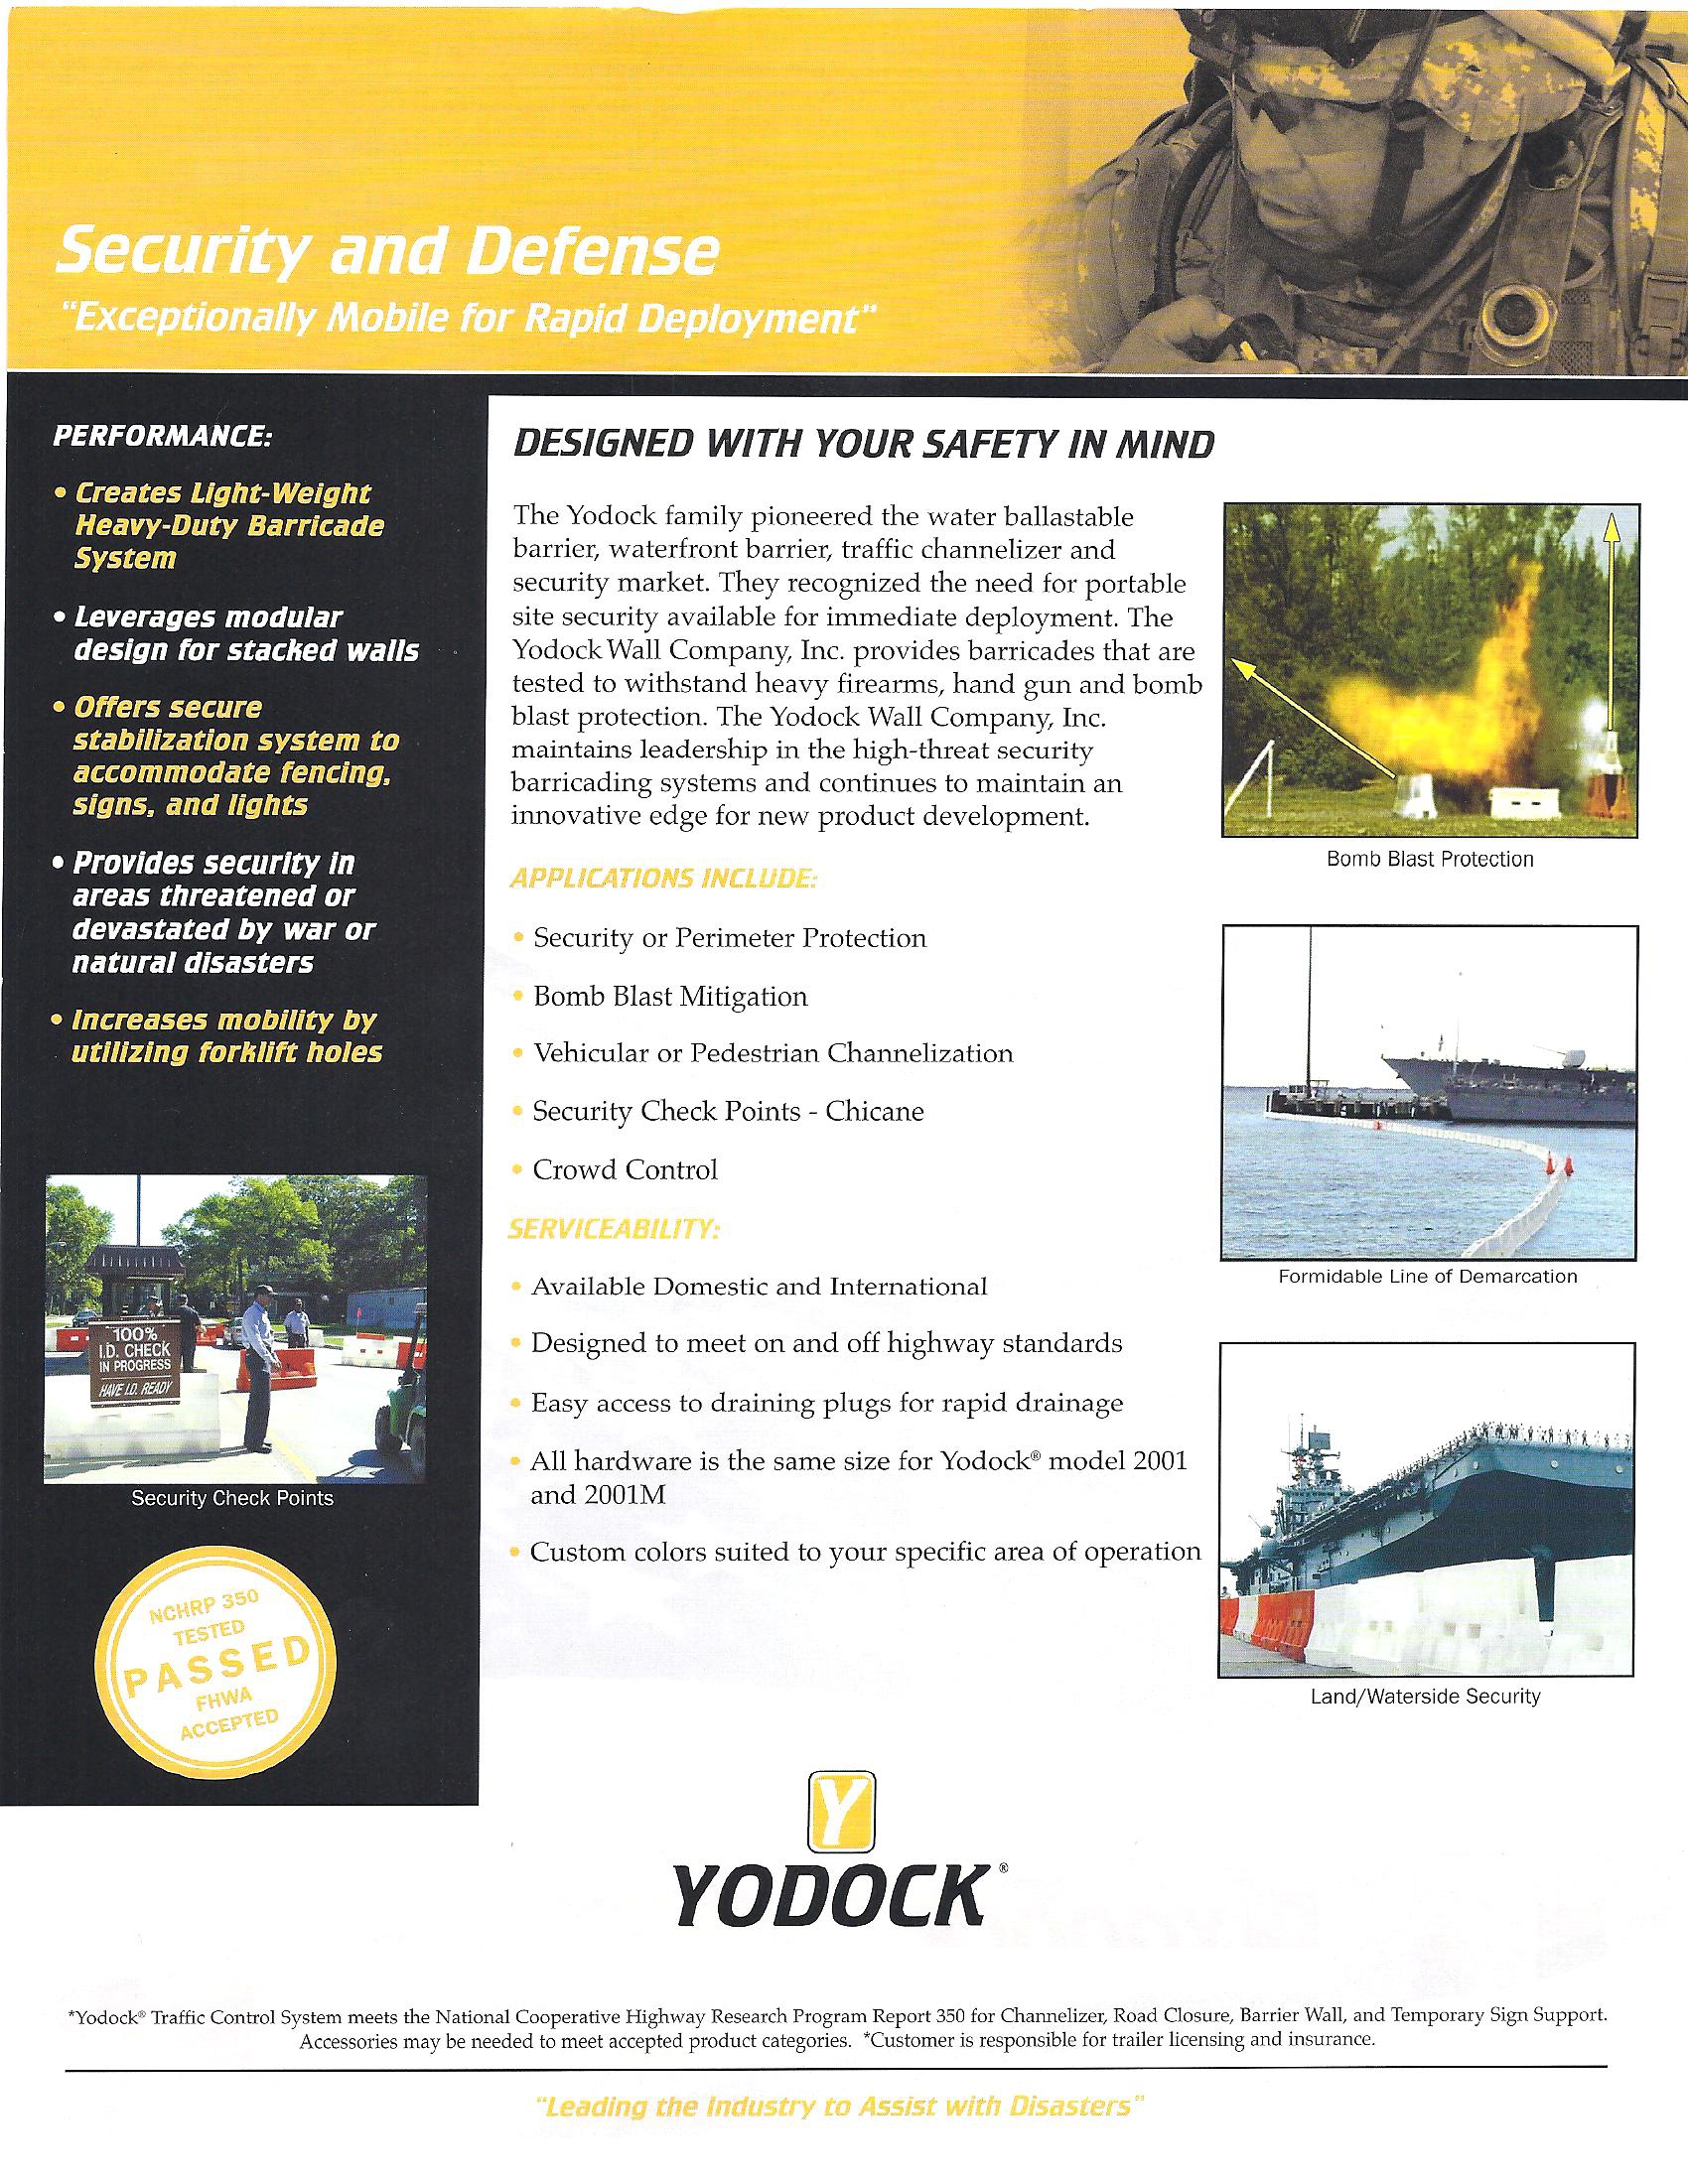 Yodock Security and Defense page 2